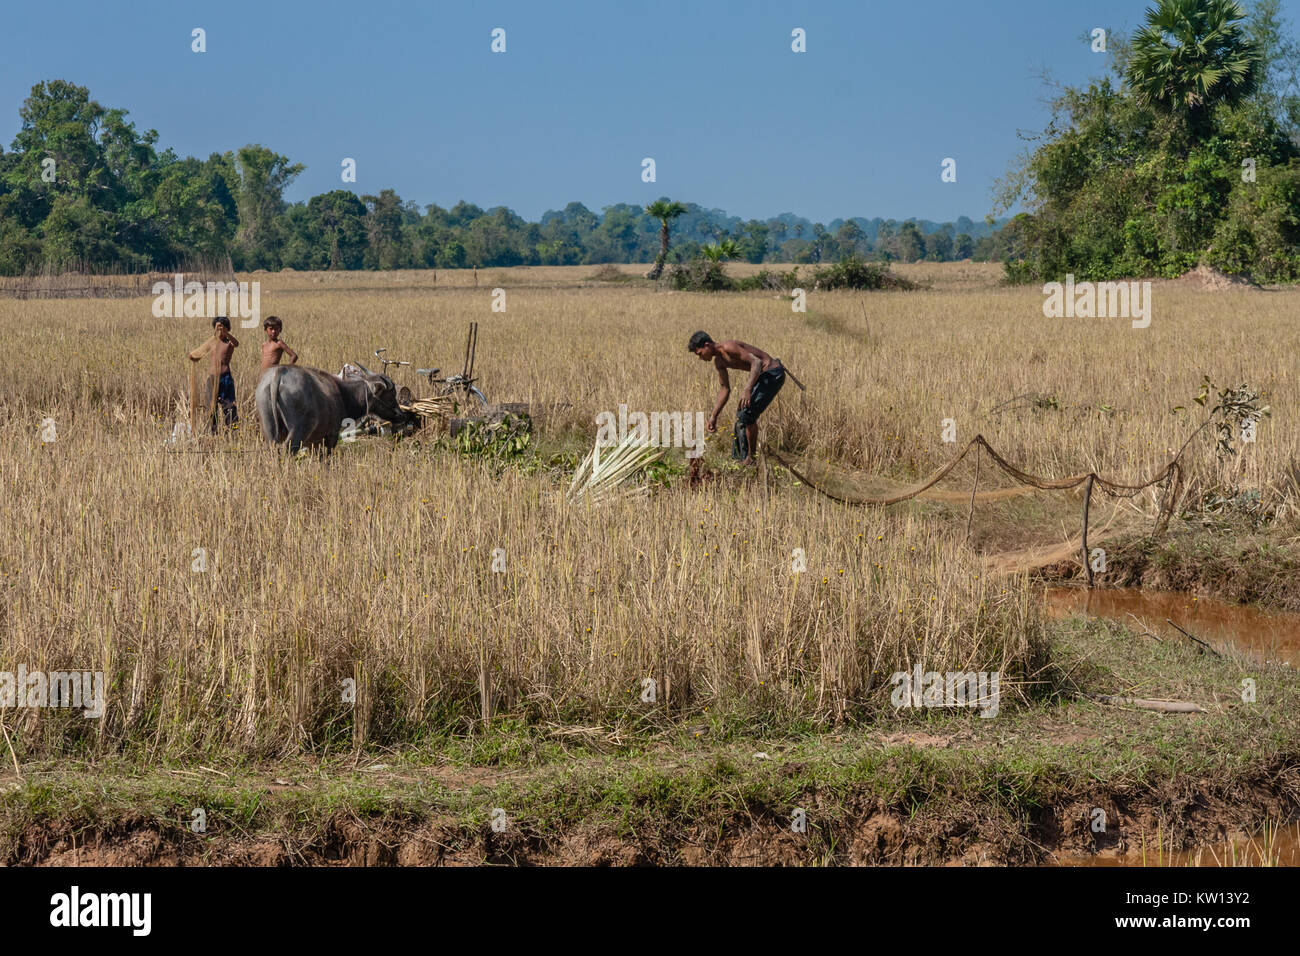 A Cambodian peasant family at work in the field Stock Photo